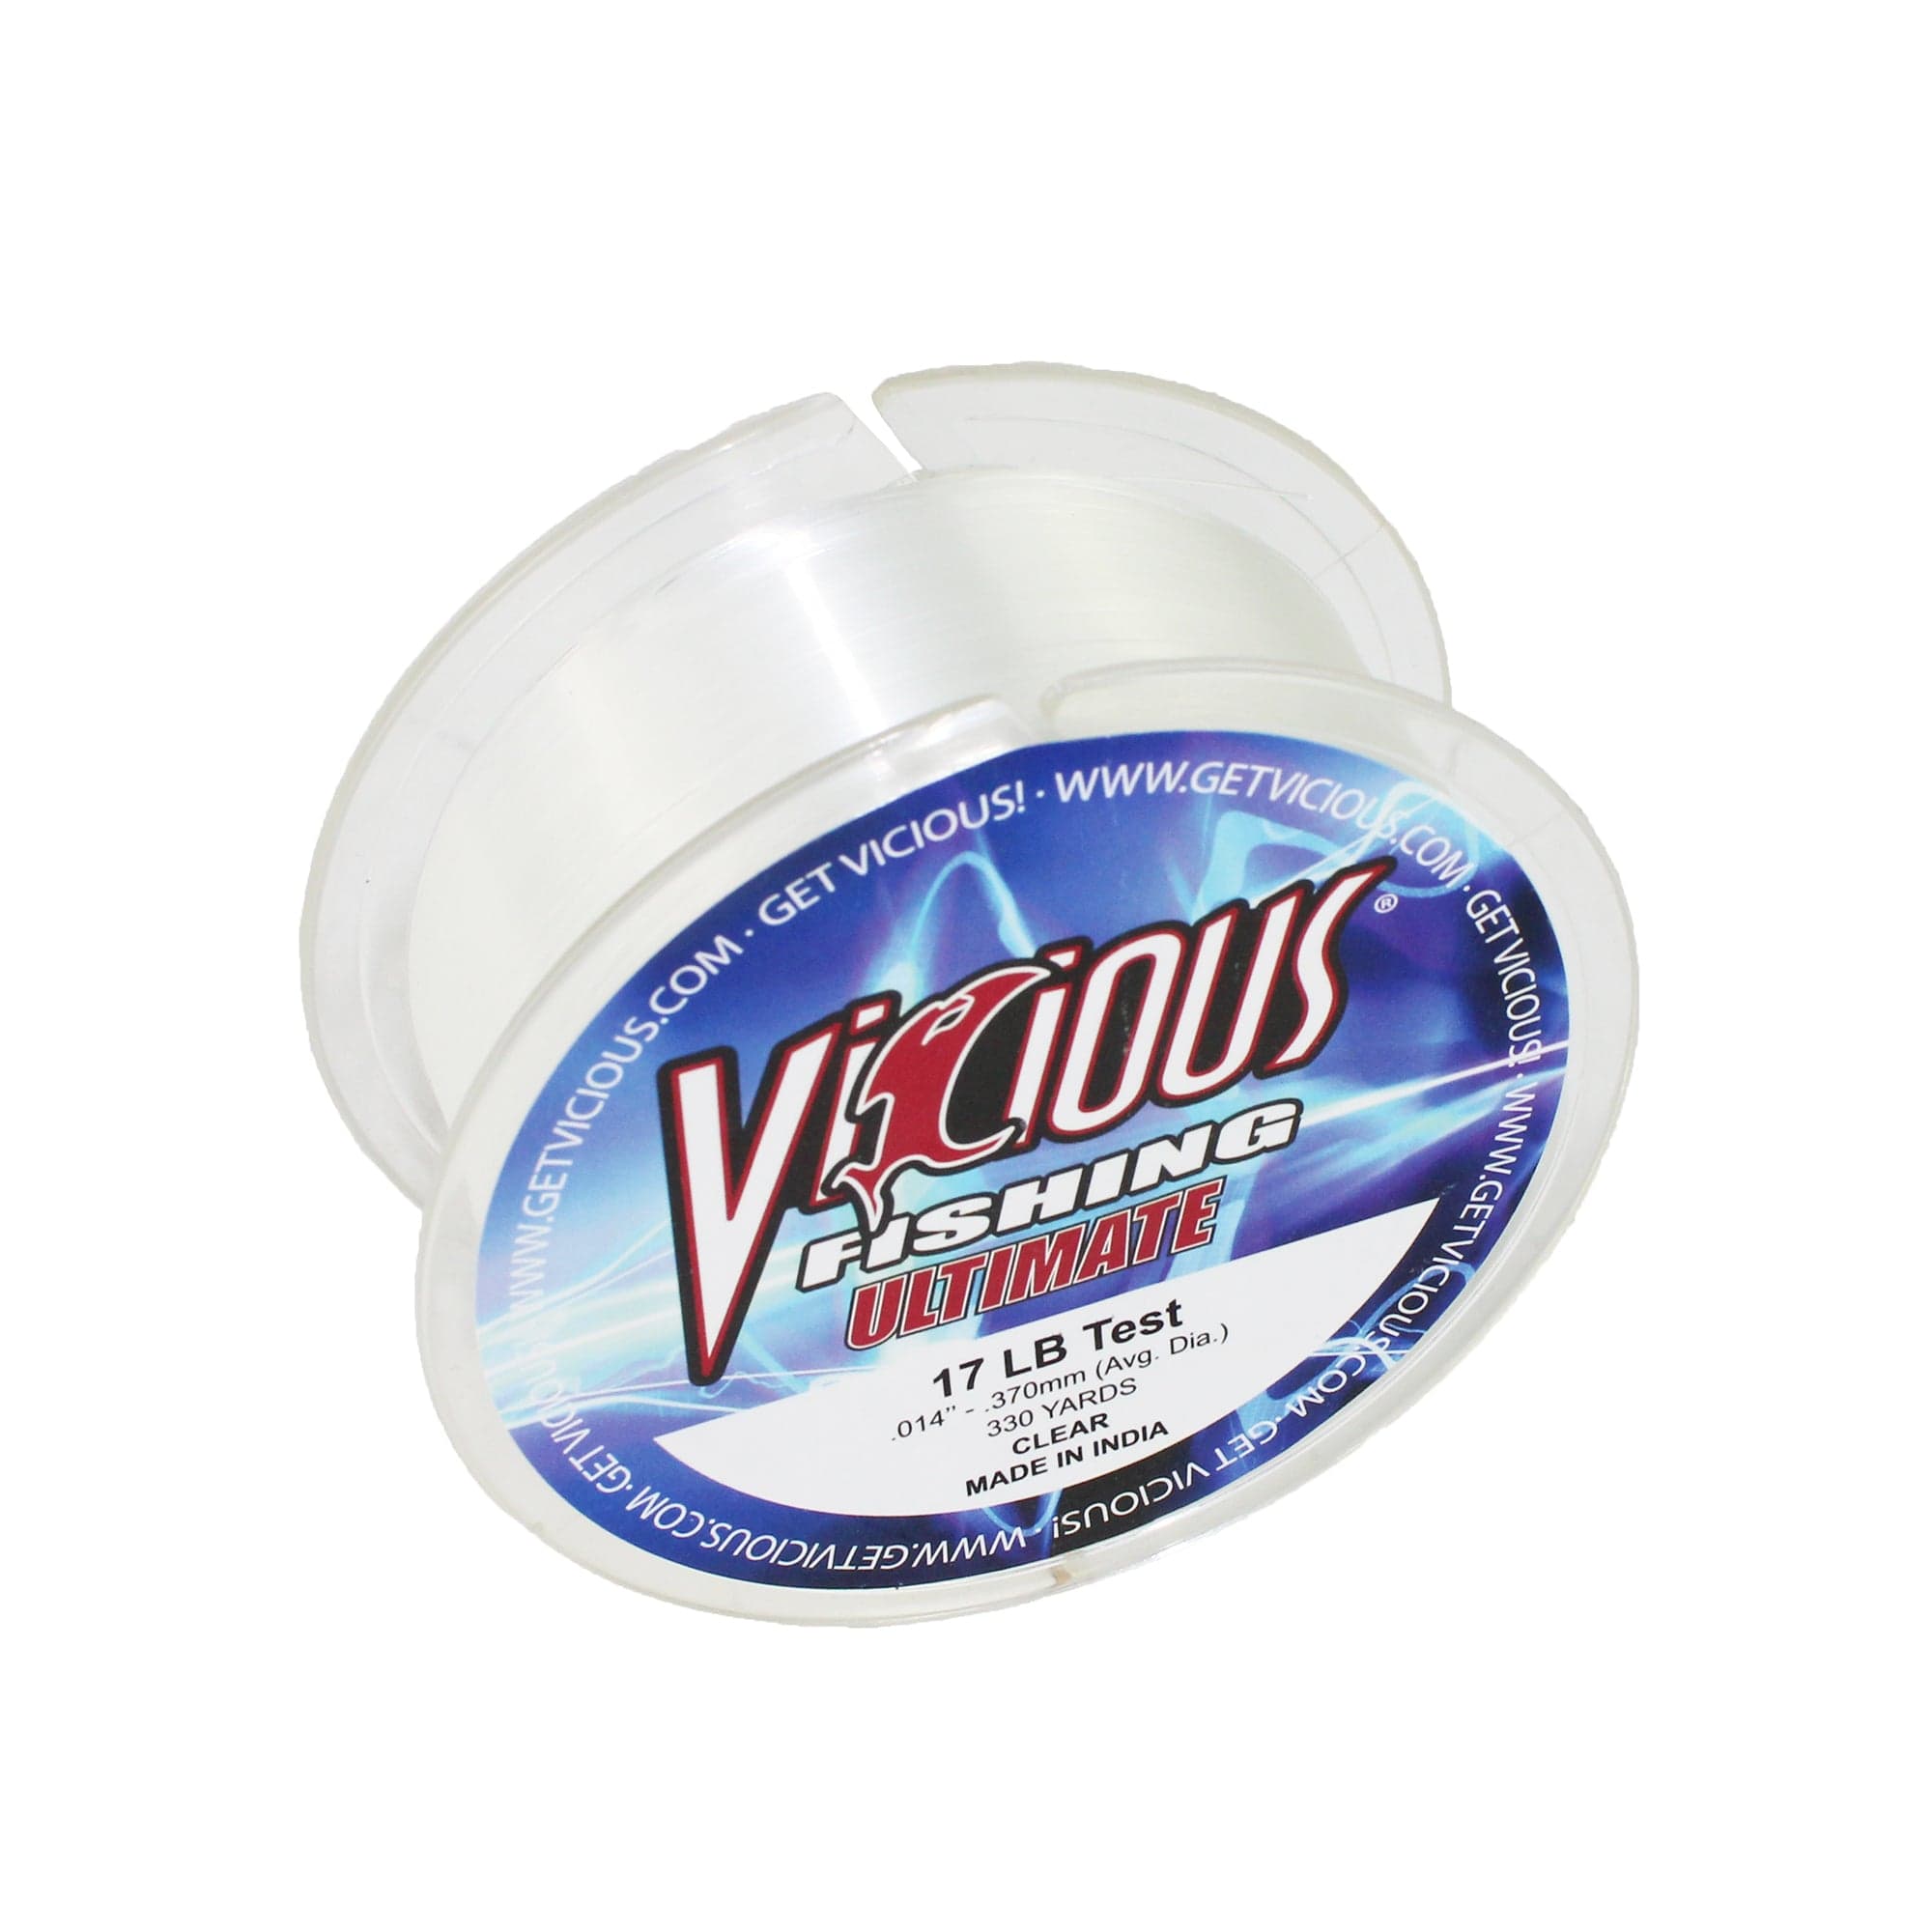 Vicious Fishing VCL Ultimate Monofilament Clear Fishing Line - 330 Yards